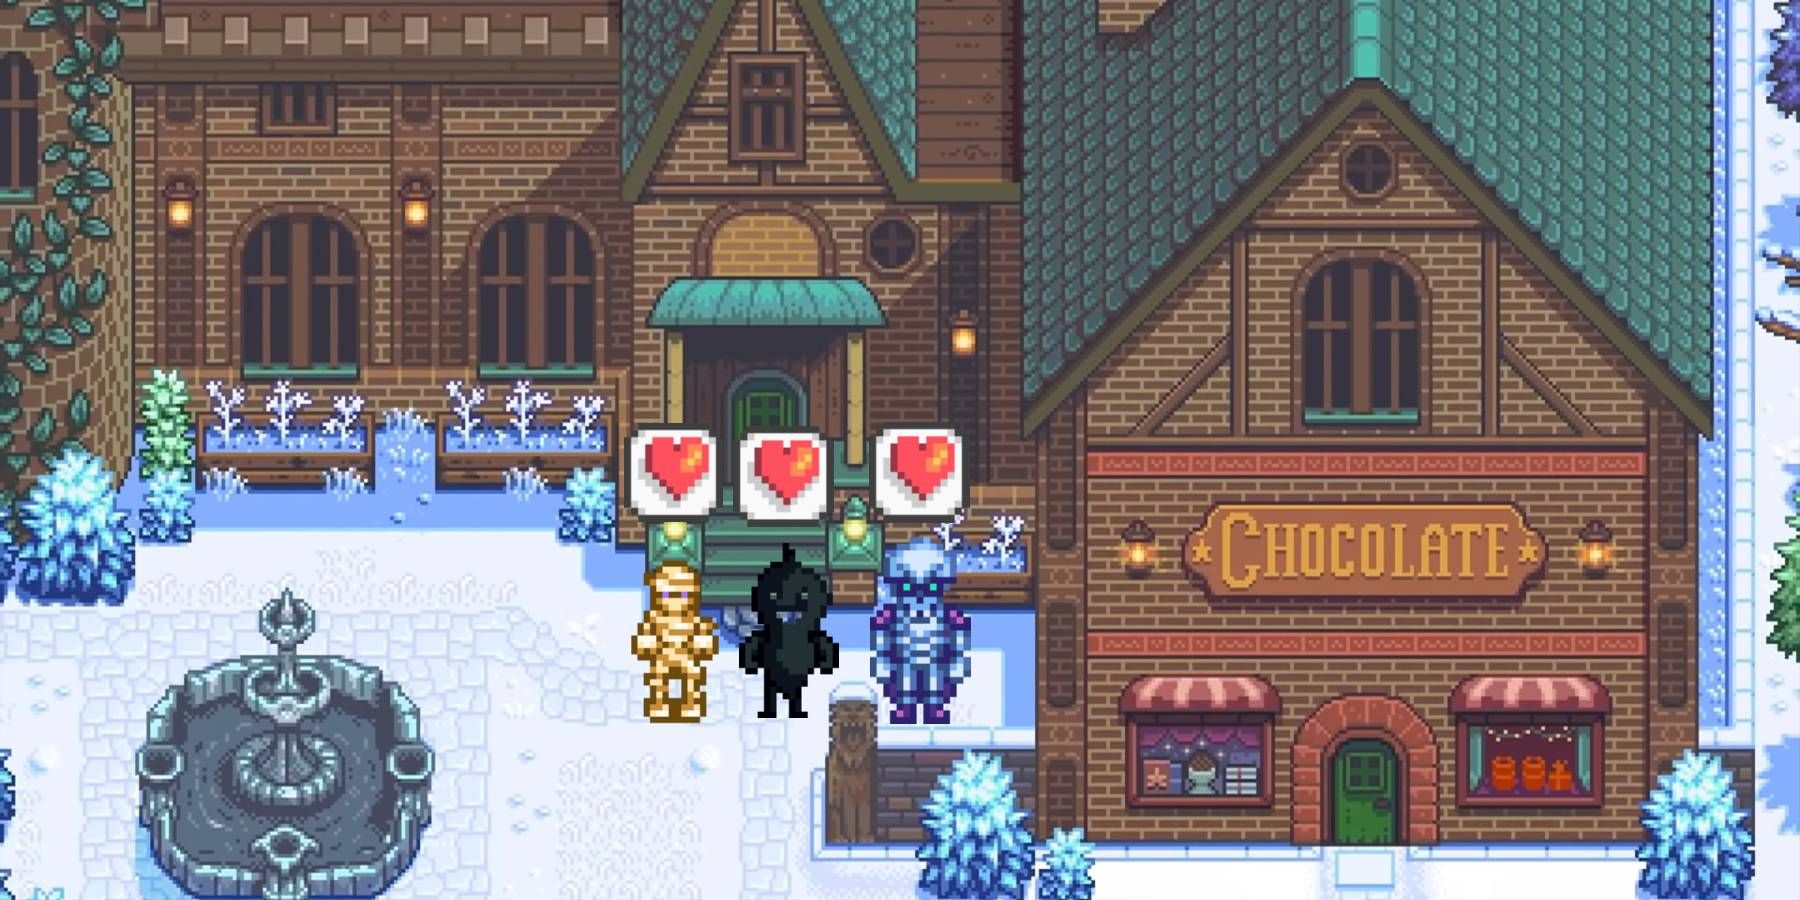 A Mummy, Shadow Brute, and Skeleton Mage from Stardew Valley with hearts over their heads in front of Haunted Chocolatier's shop